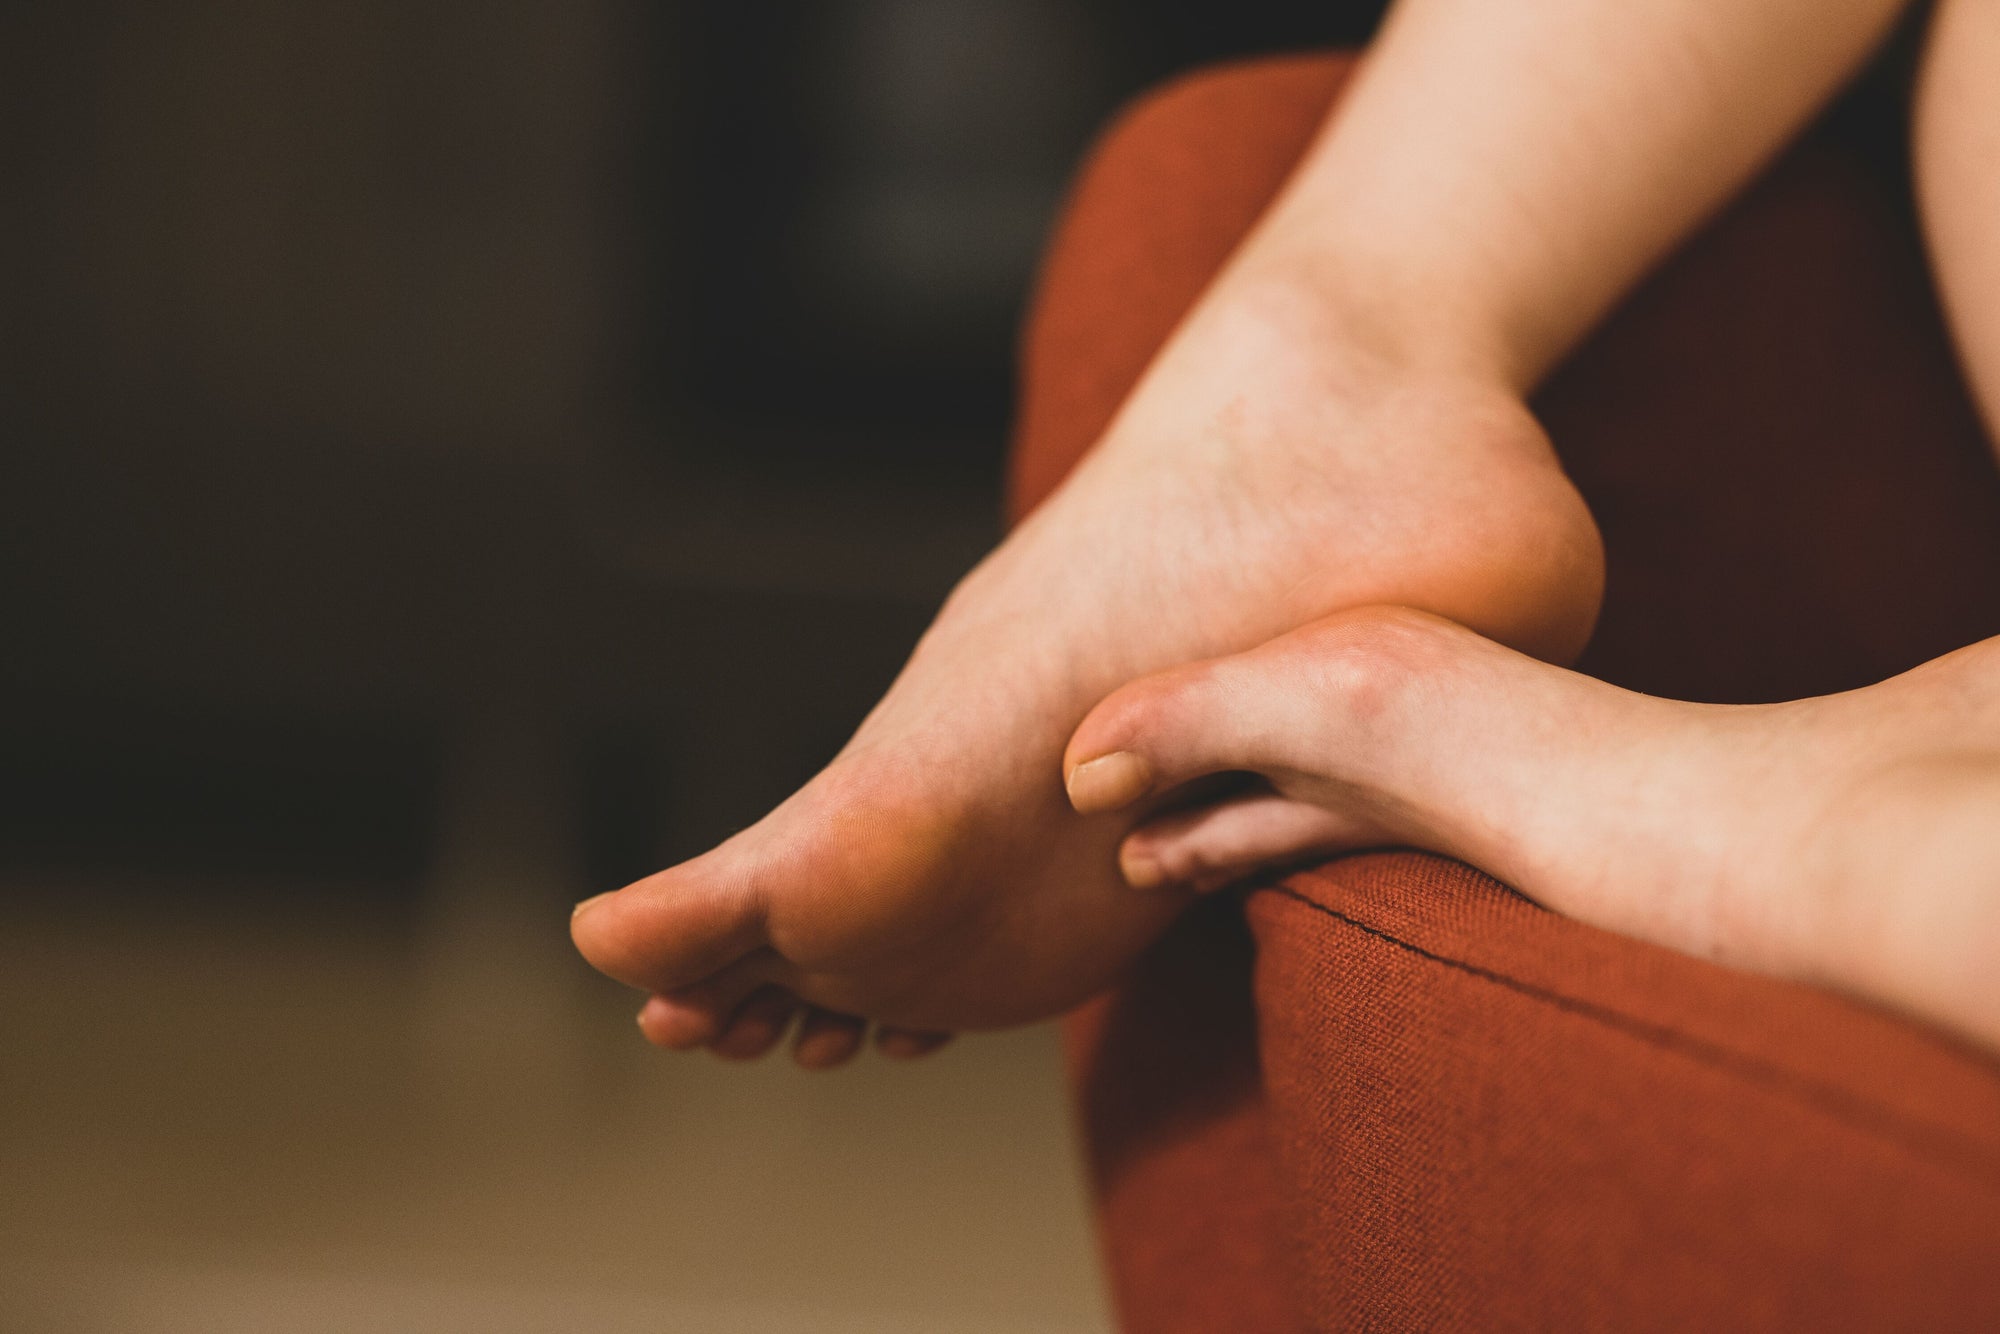 Photo by engin akyurt on Unsplash. This is an image of a woman's ankle.